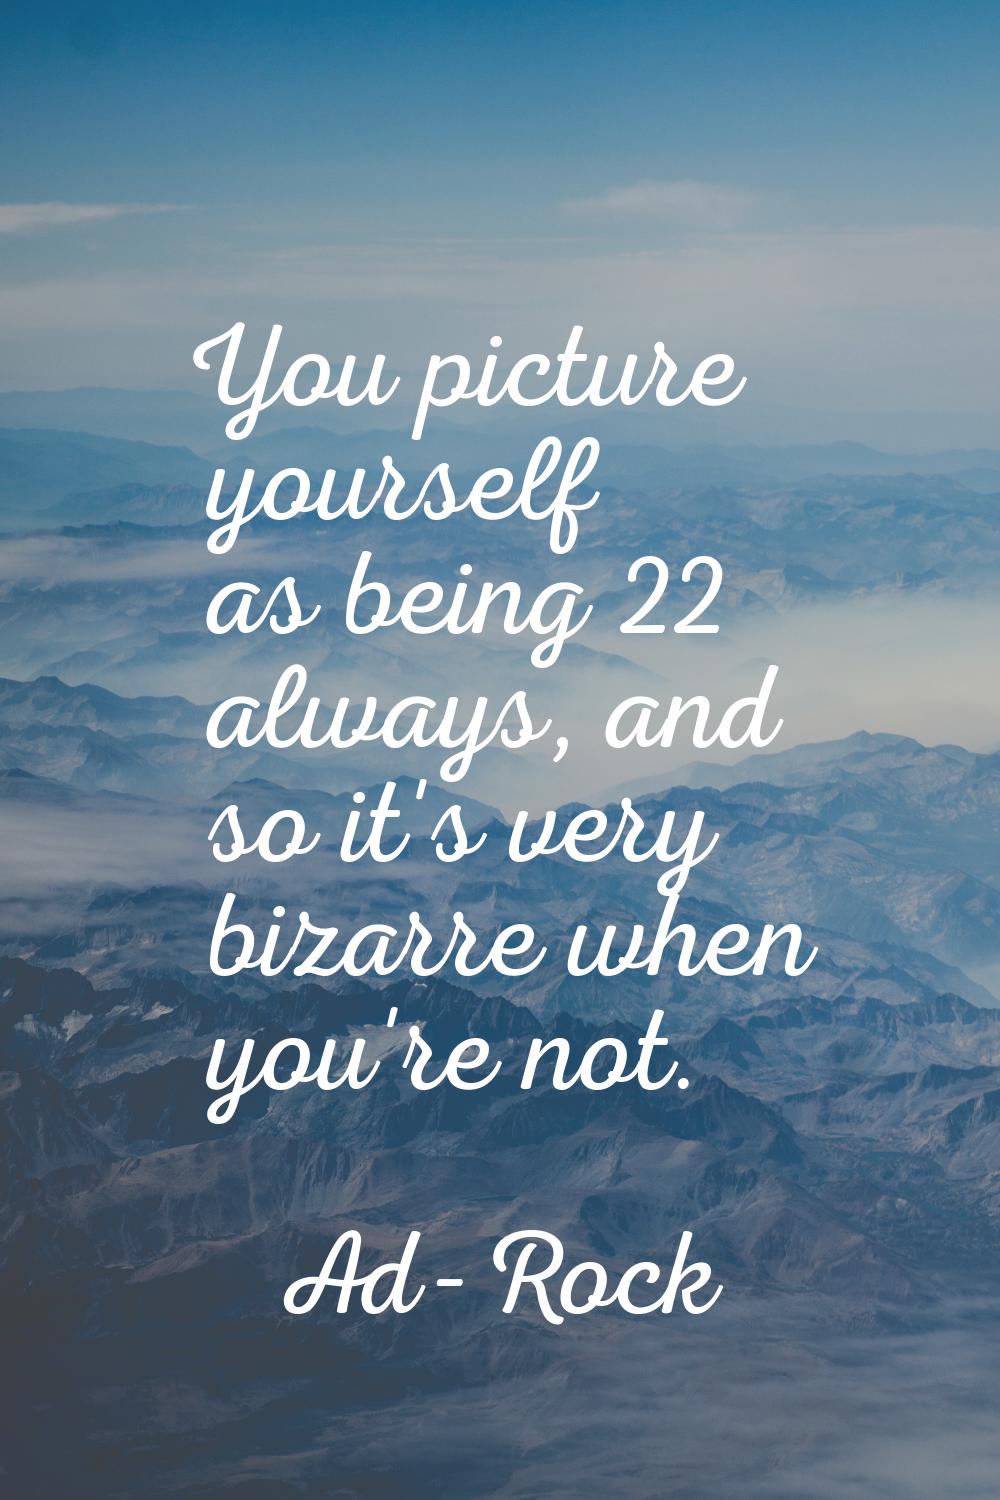 You picture yourself as being 22 always, and so it's very bizarre when you're not.